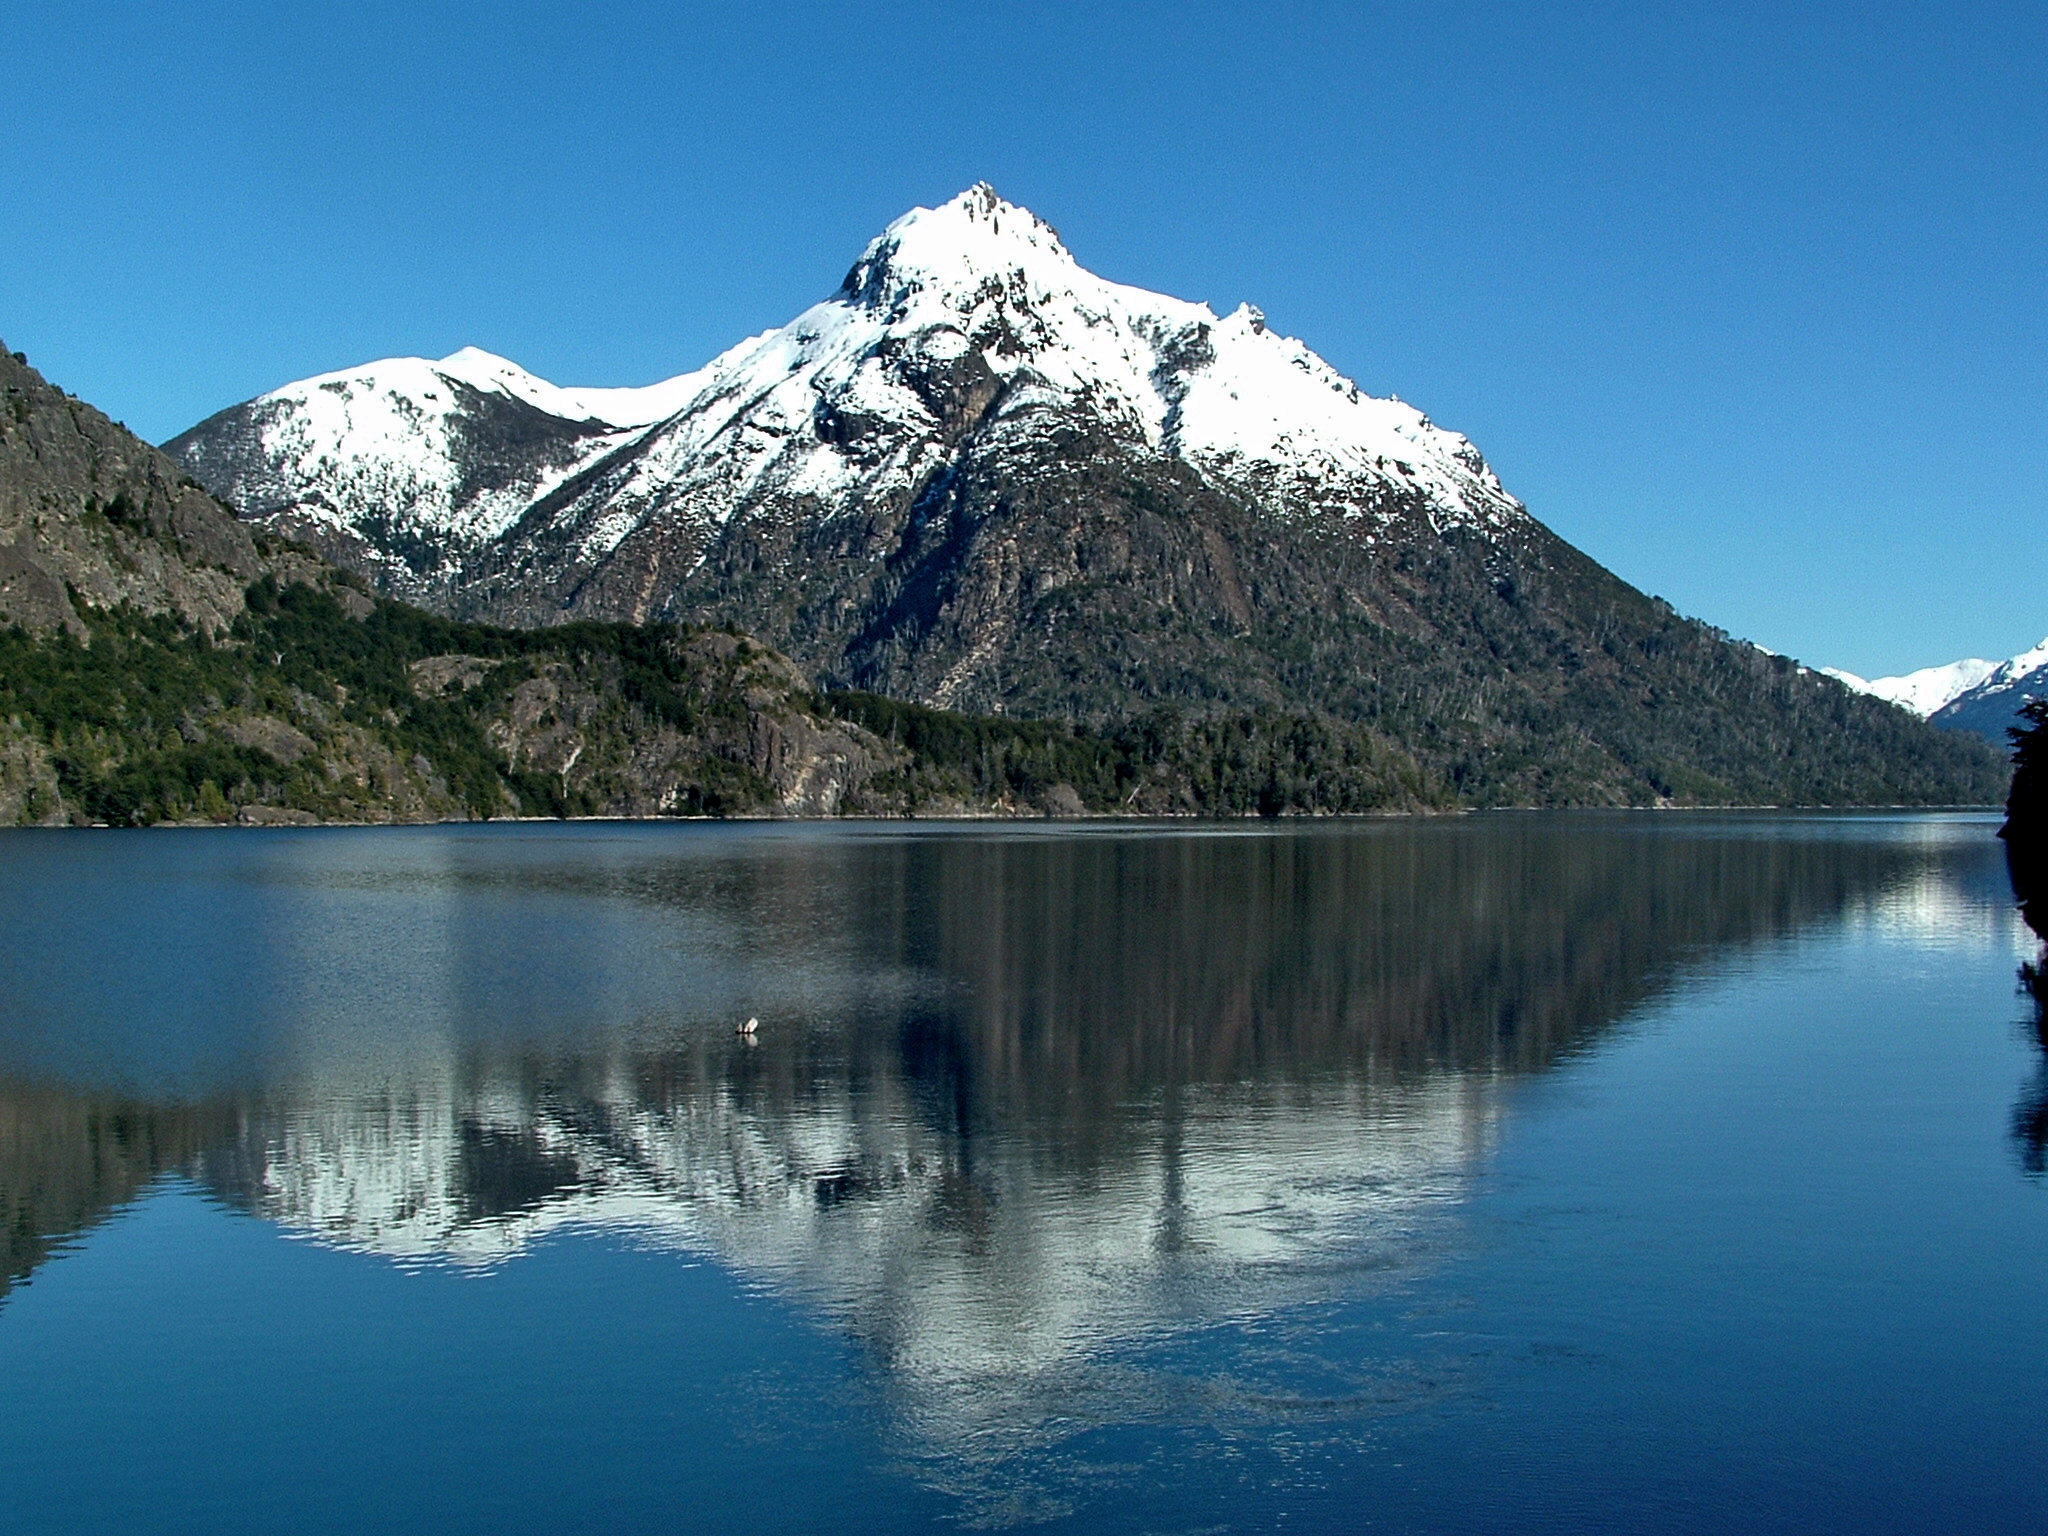 a snow capped mountain on top of a mountain range over water